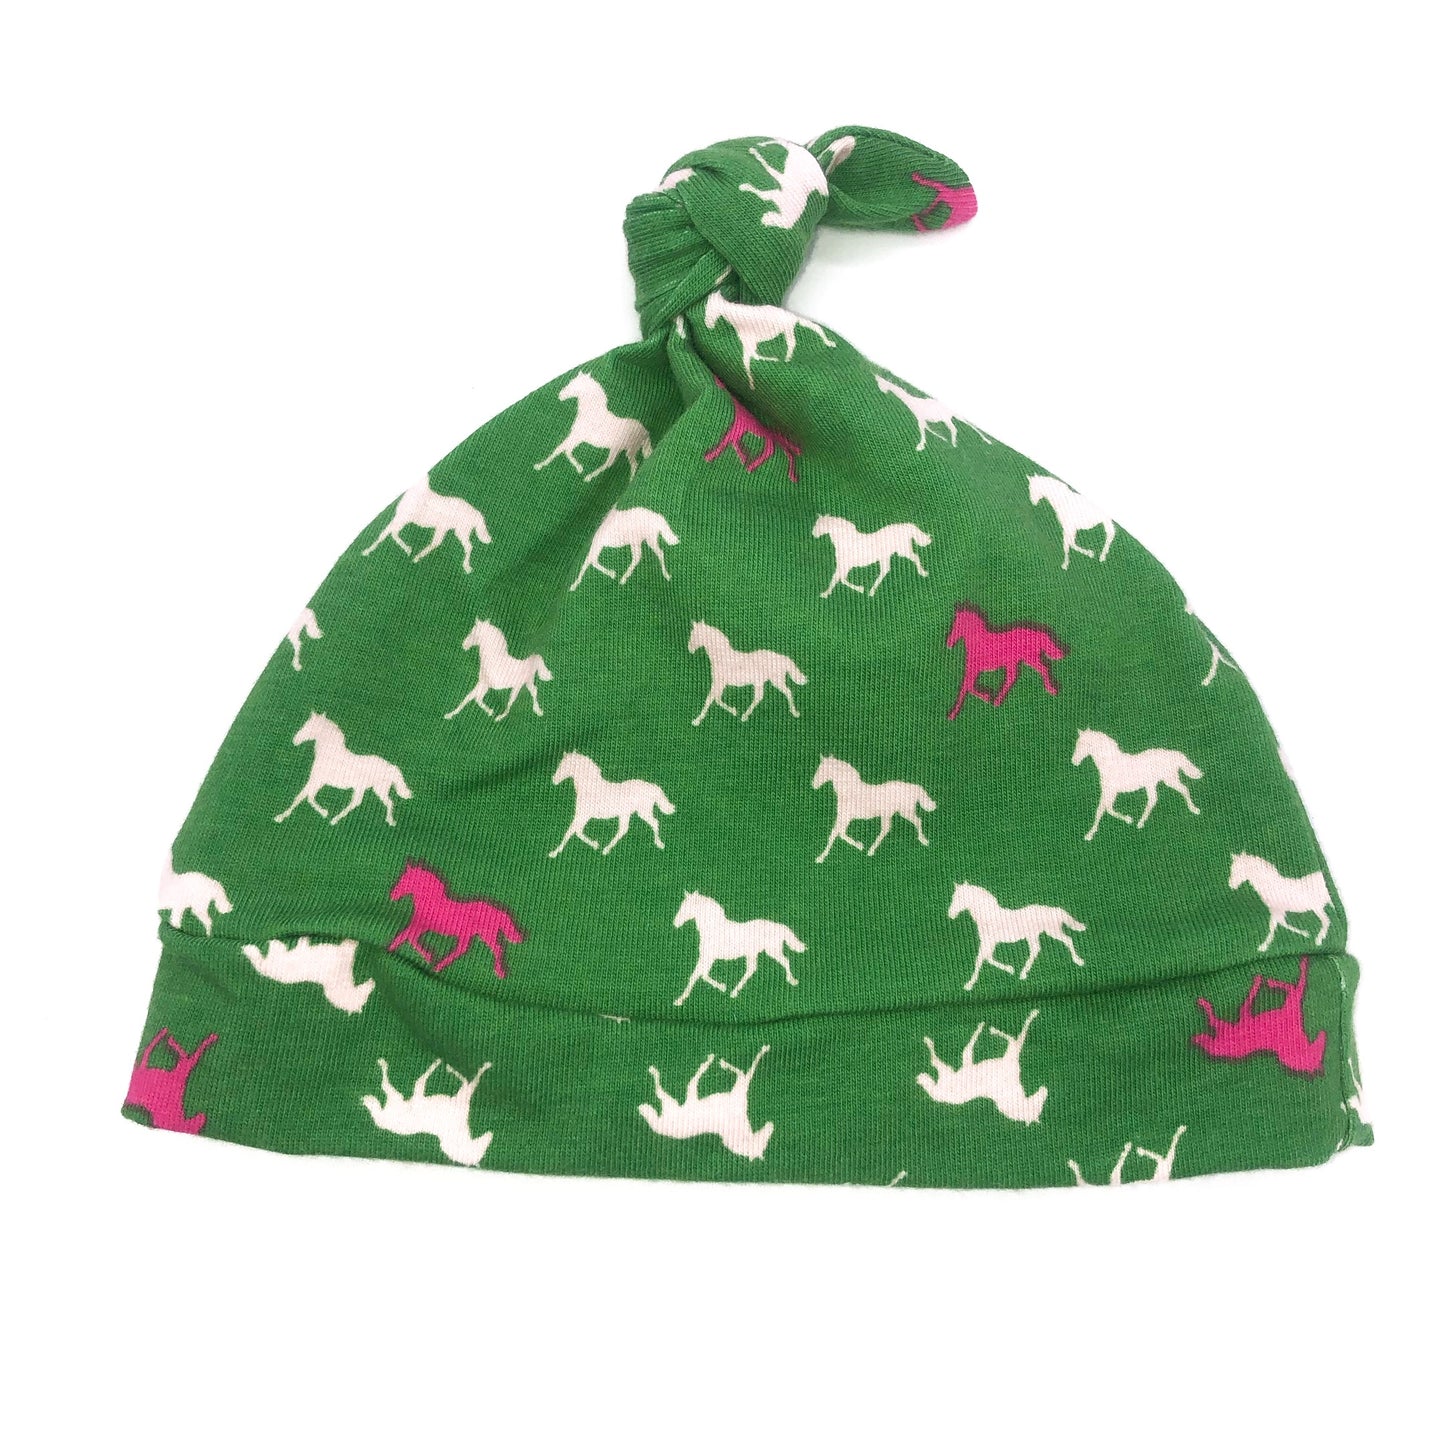 Knot Hat in Newborn: Horses on Green